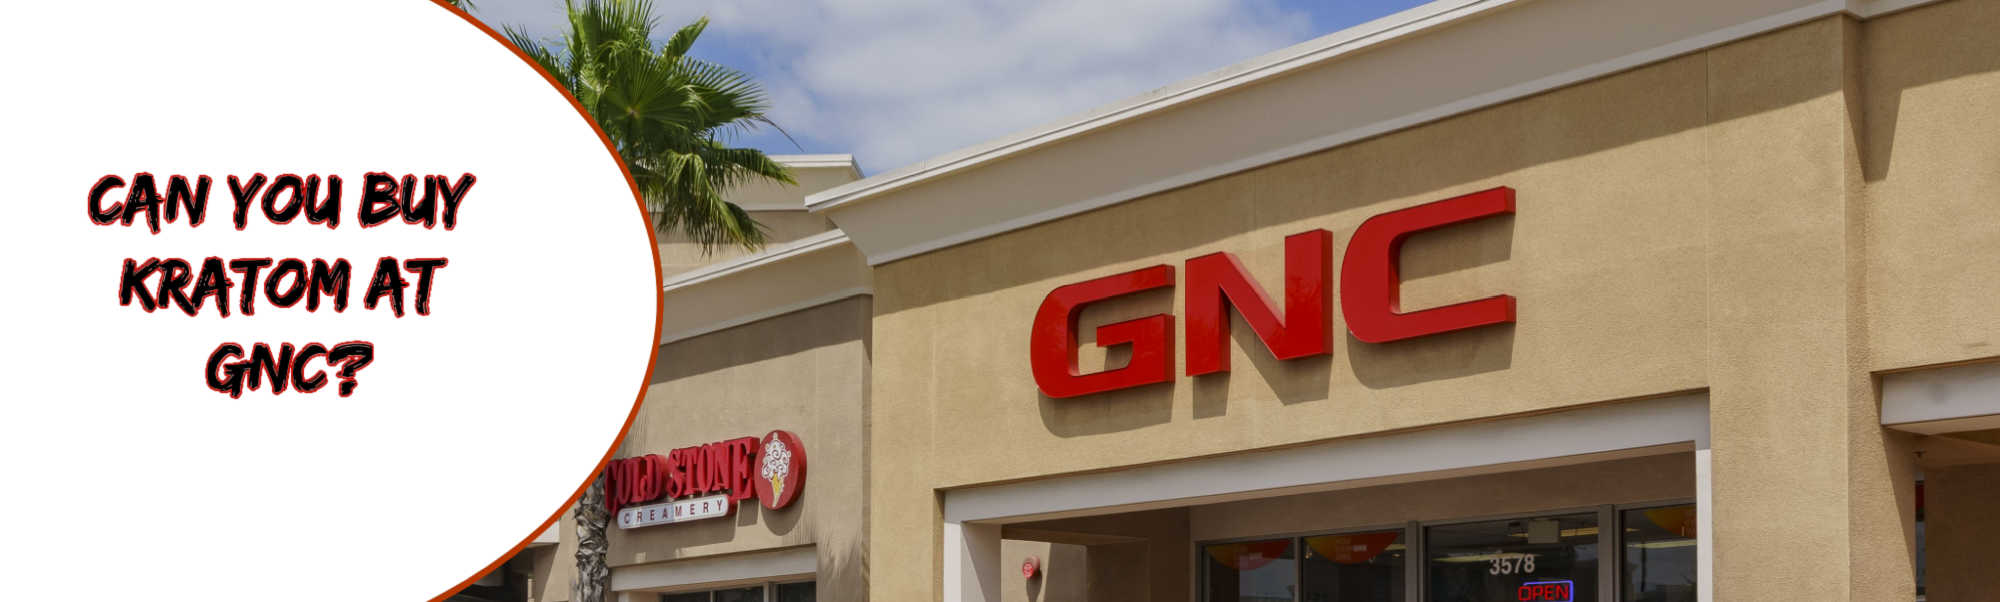 image of can you buy kratom at gnc